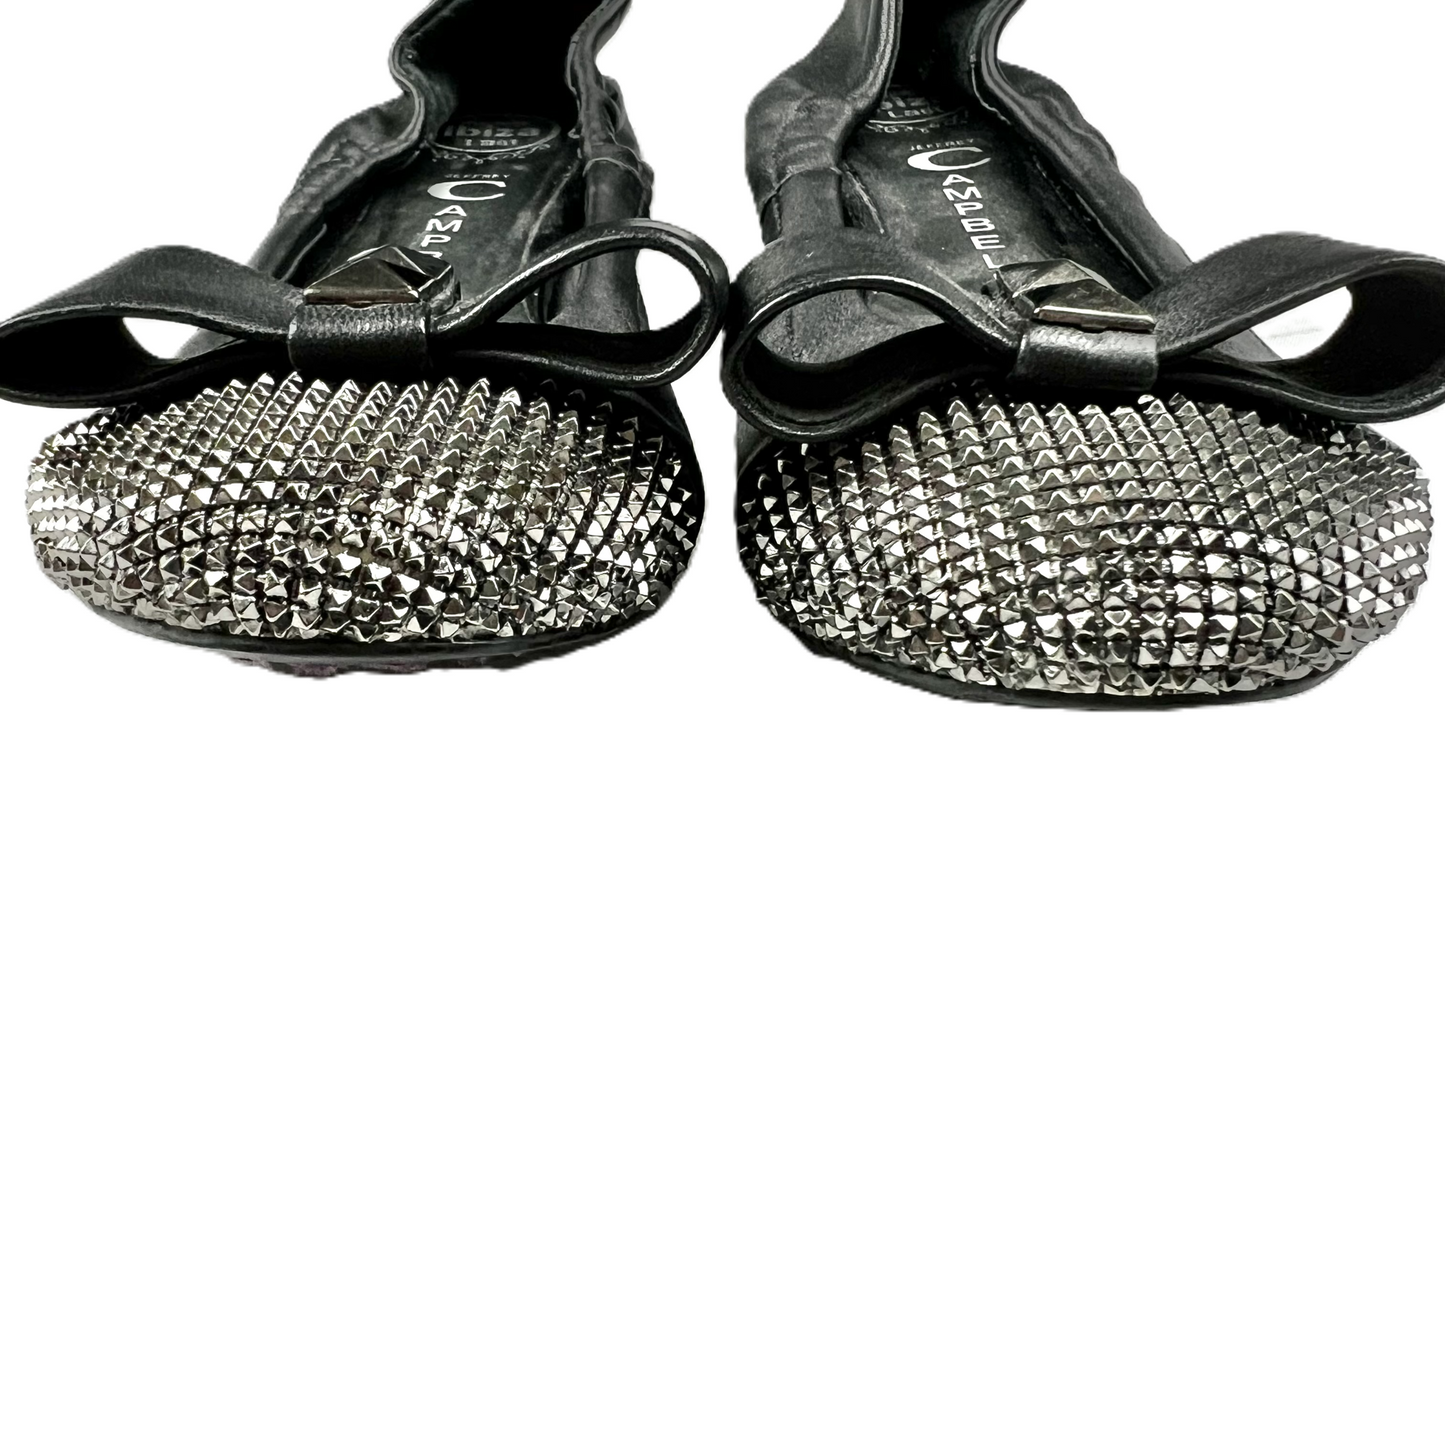 Black Silver Shoes Designer By Jeffery Campbell, Size: 6